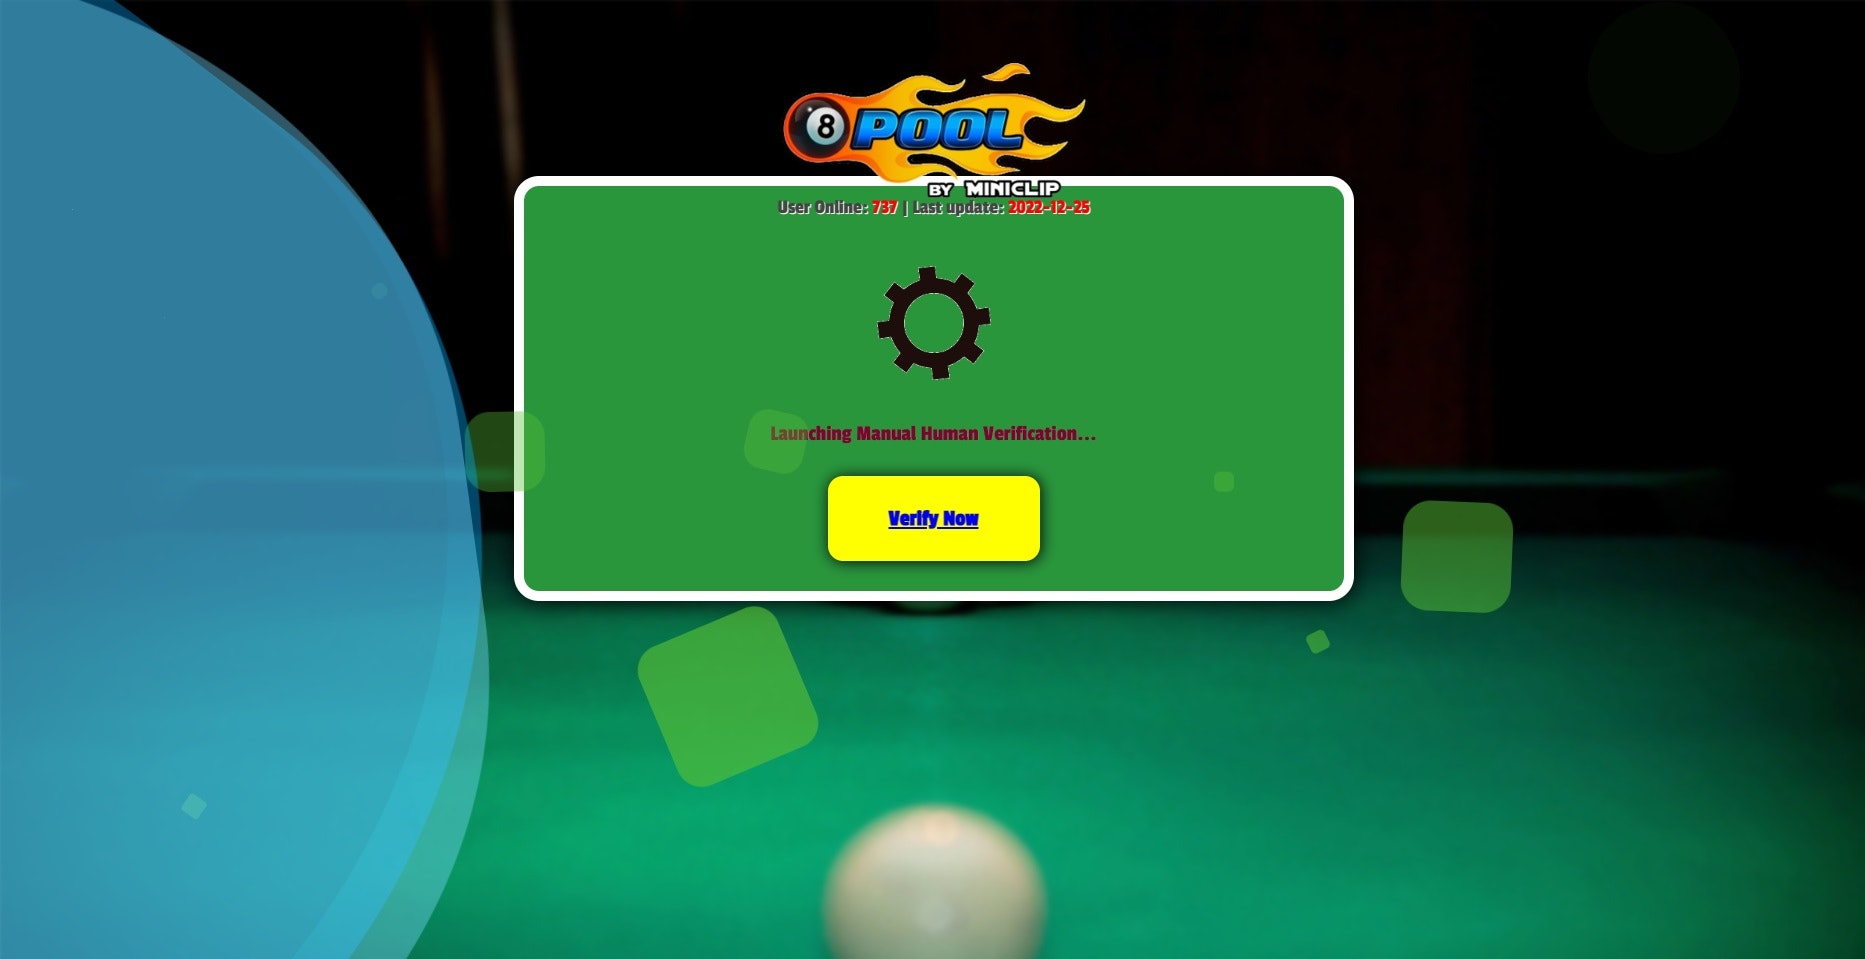 8 Ball Pool Coins Cash Hack Generator - Product Information